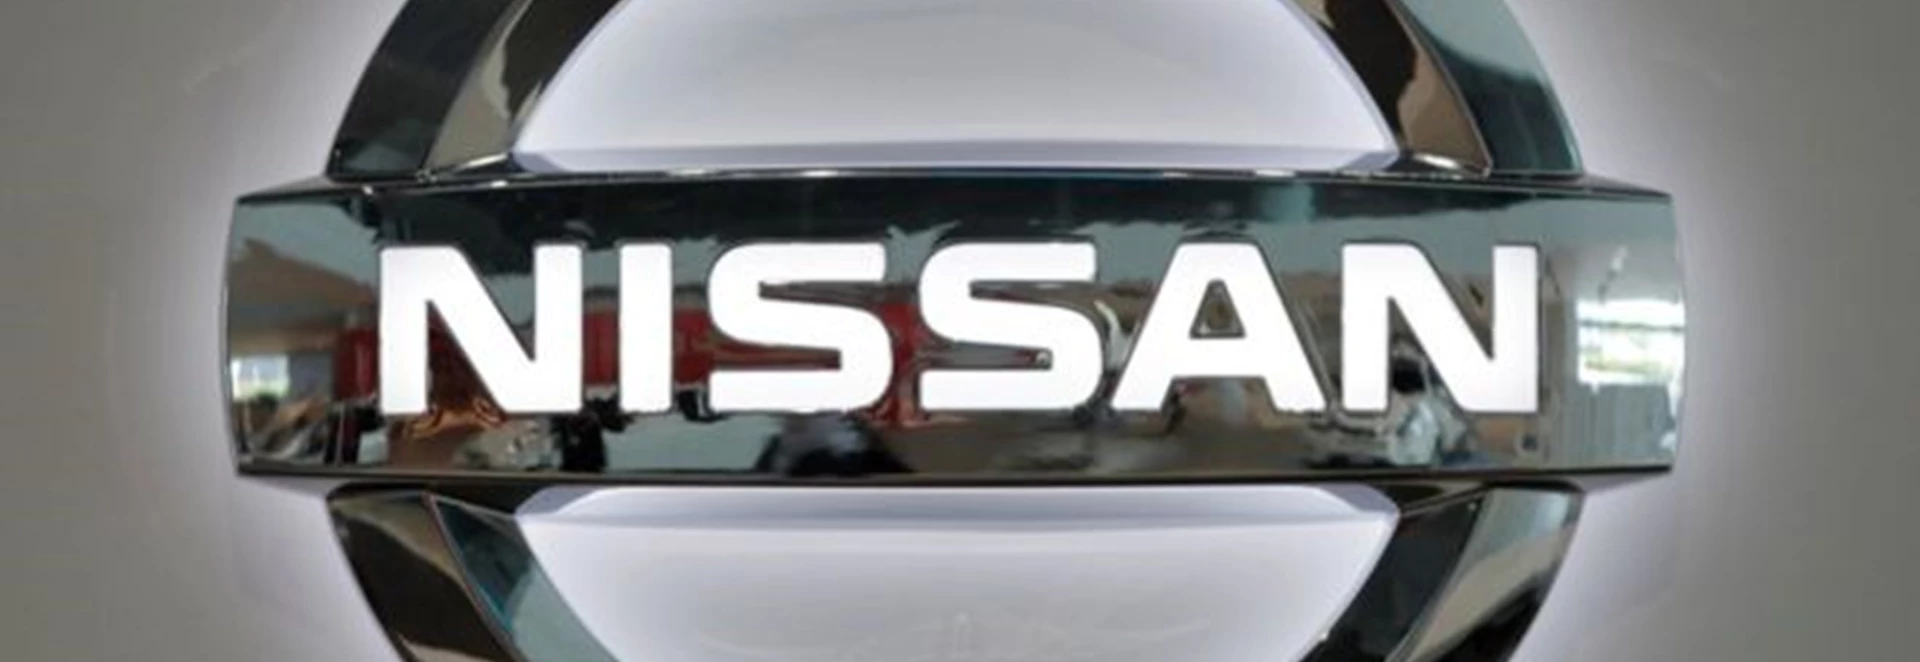 Nissan is taking legal action against Vote Leave campaign